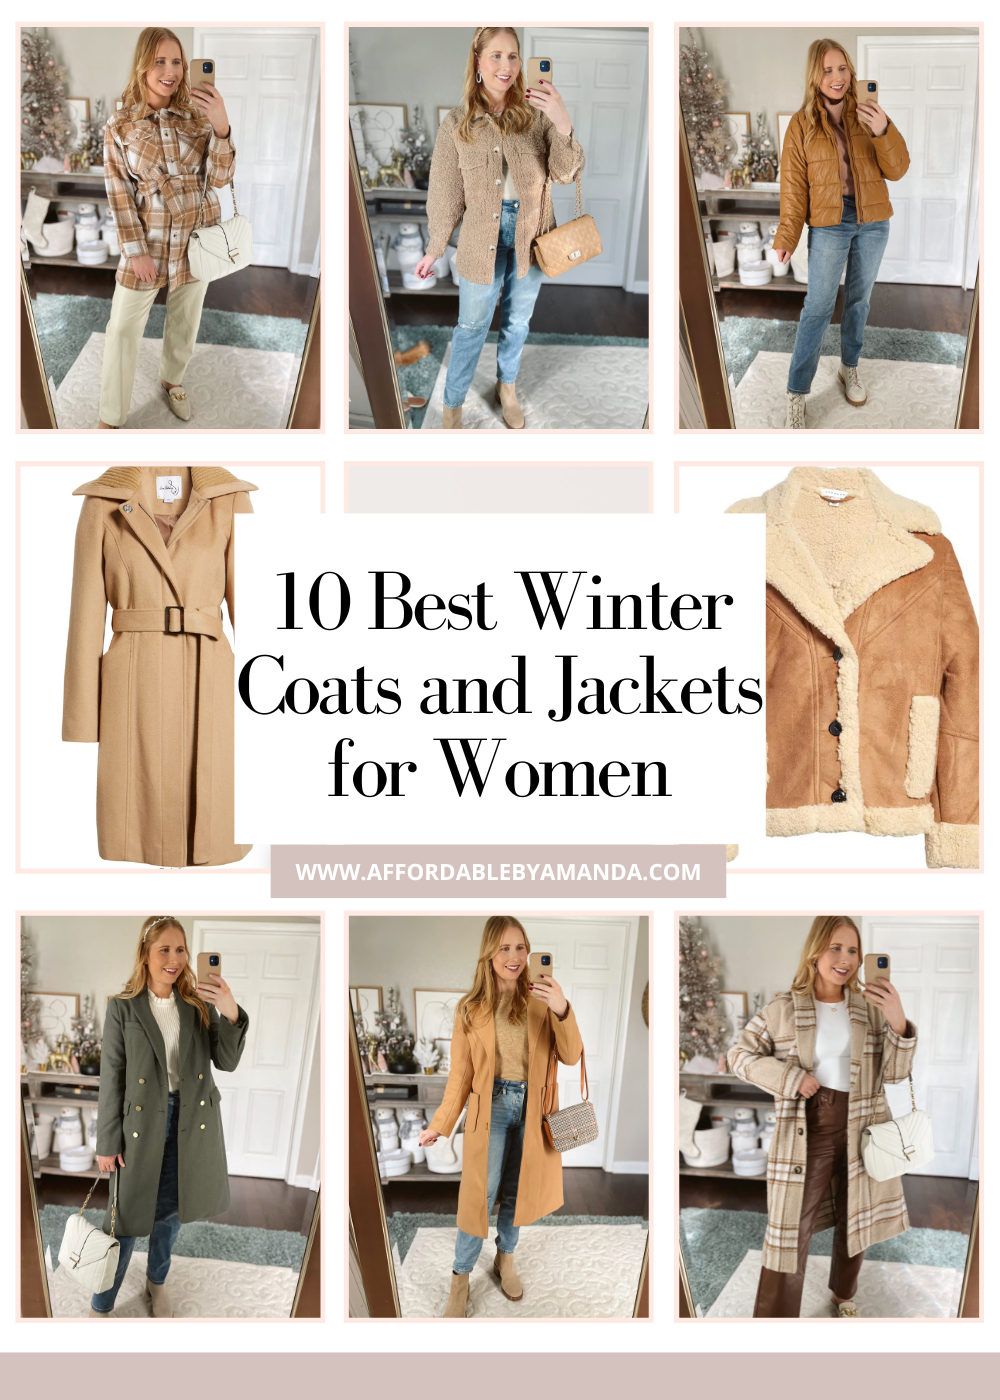 How to Choose the Best Winter Coats for Women ☆ Newest Winter